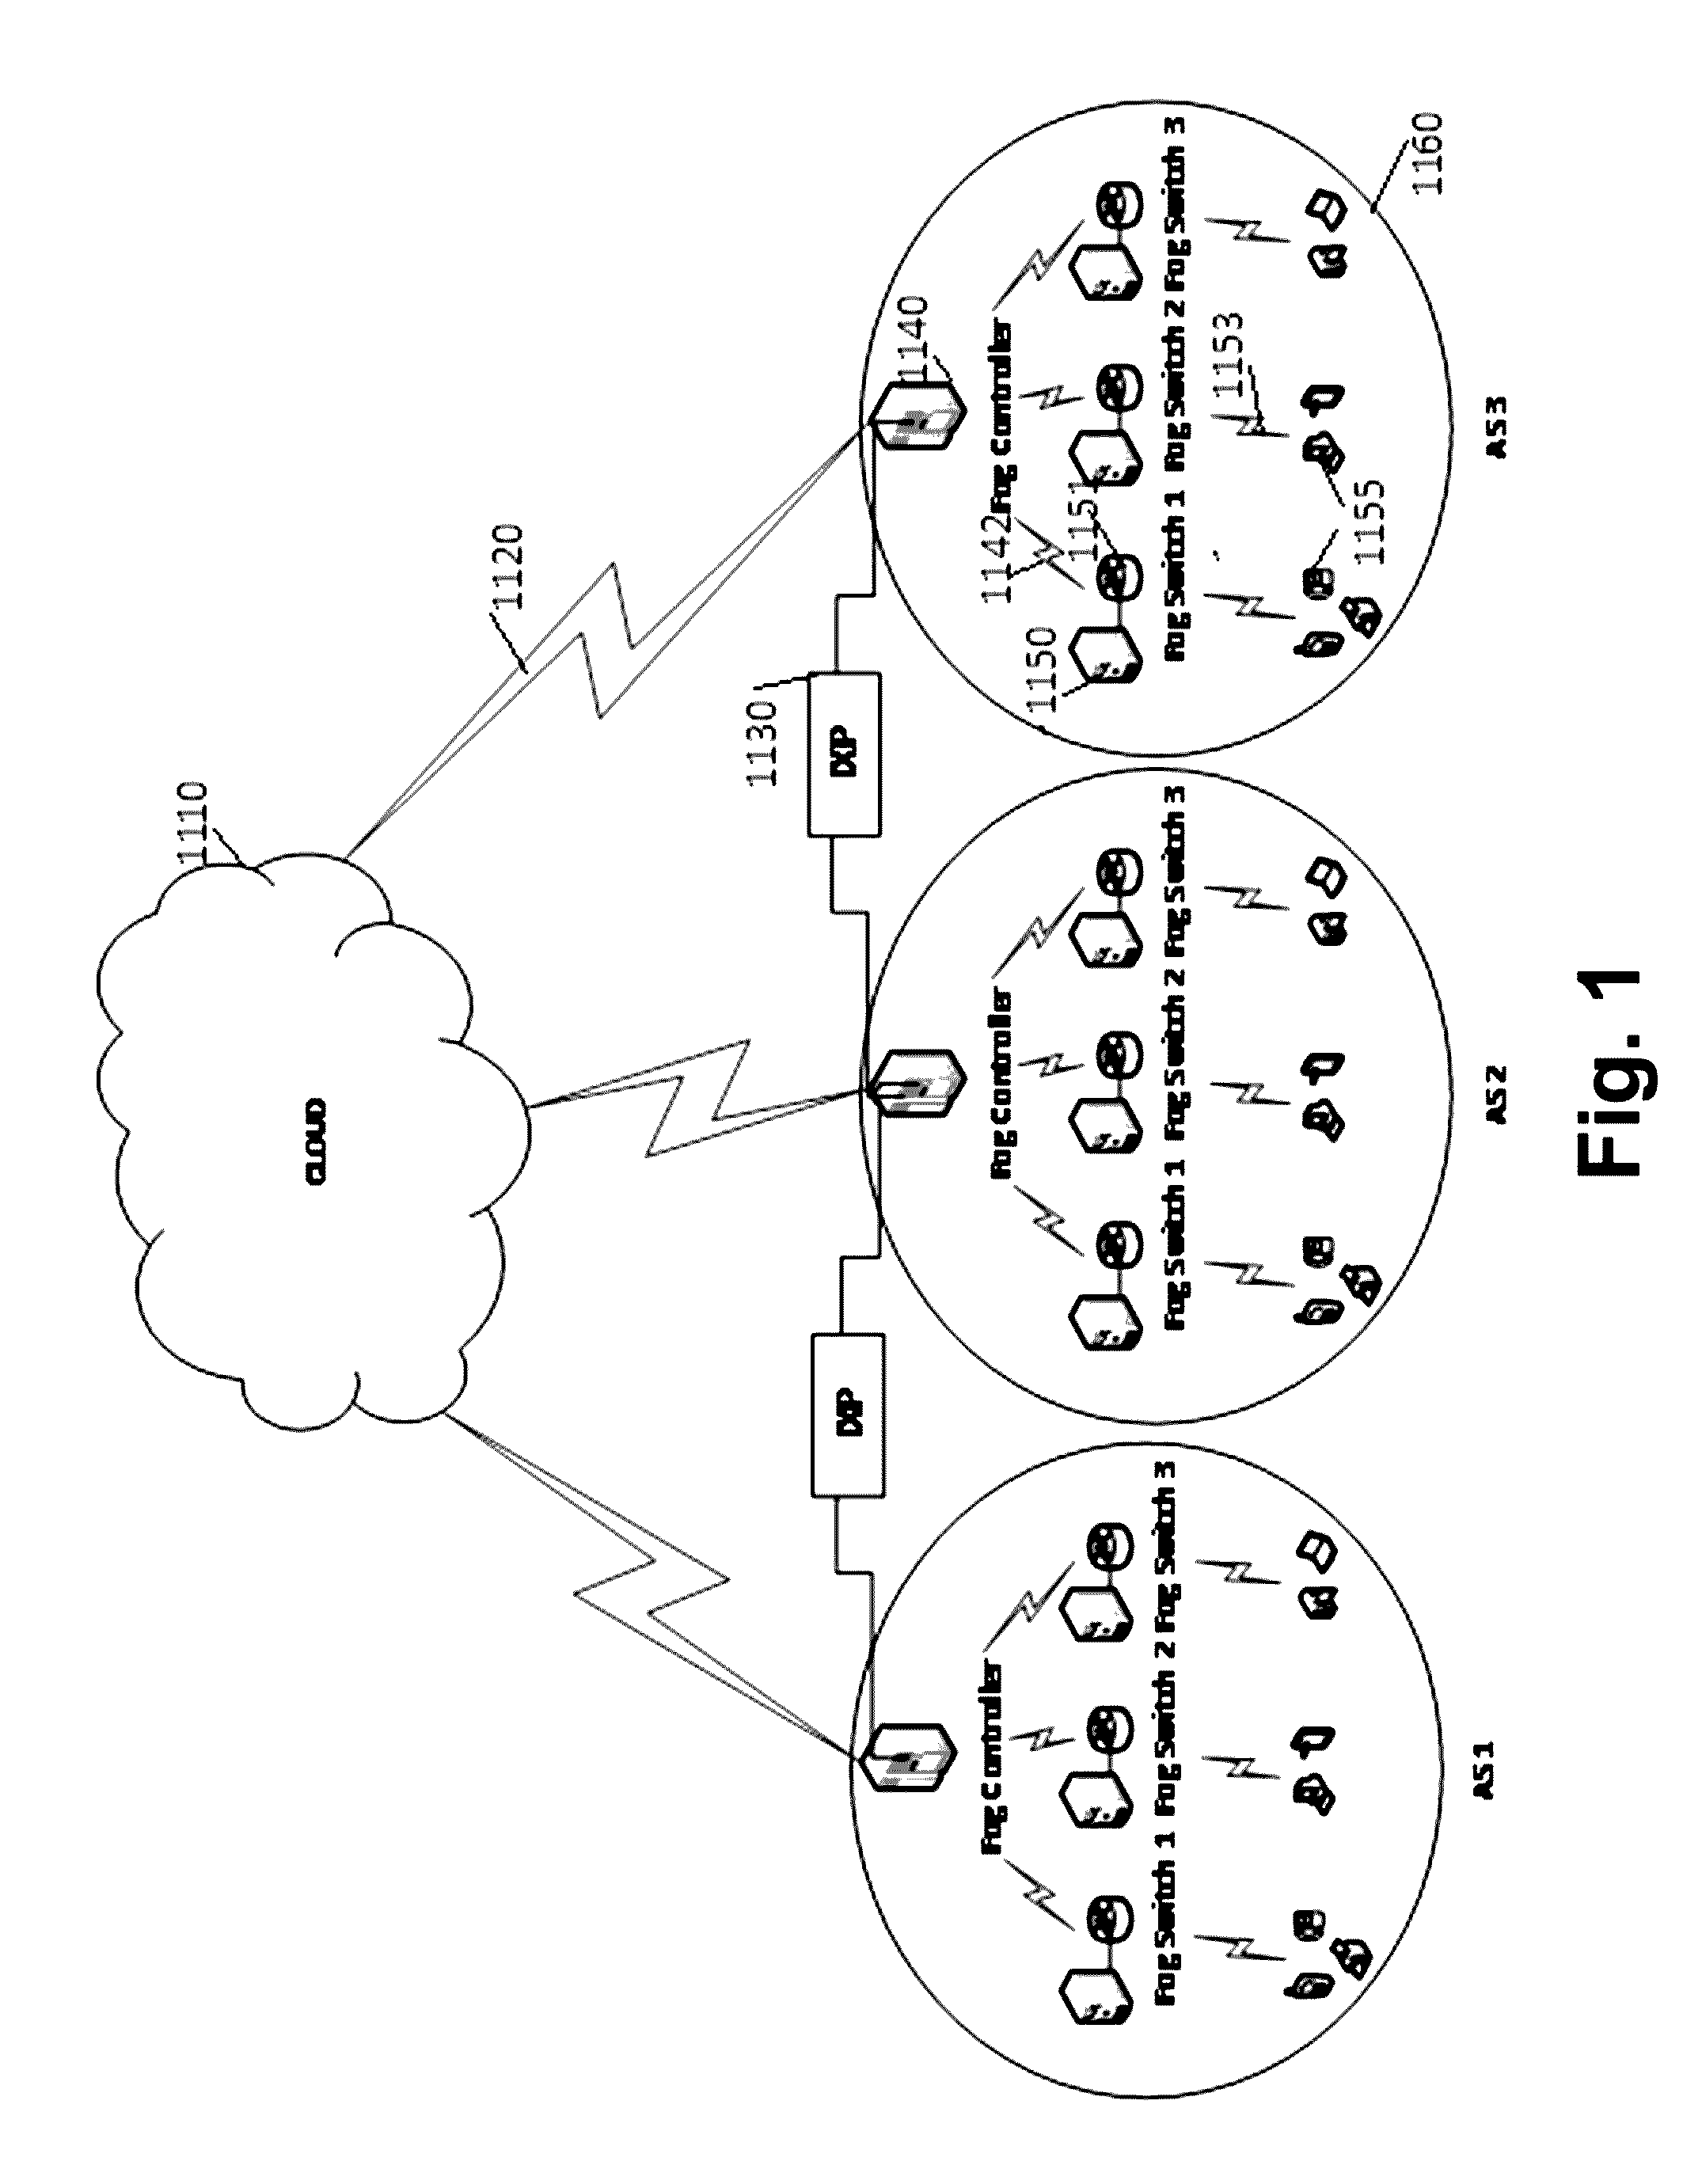 System and Apparatus for Network Conscious Edge to Cloud Sensing, Analytics, Actuation and Virtualization